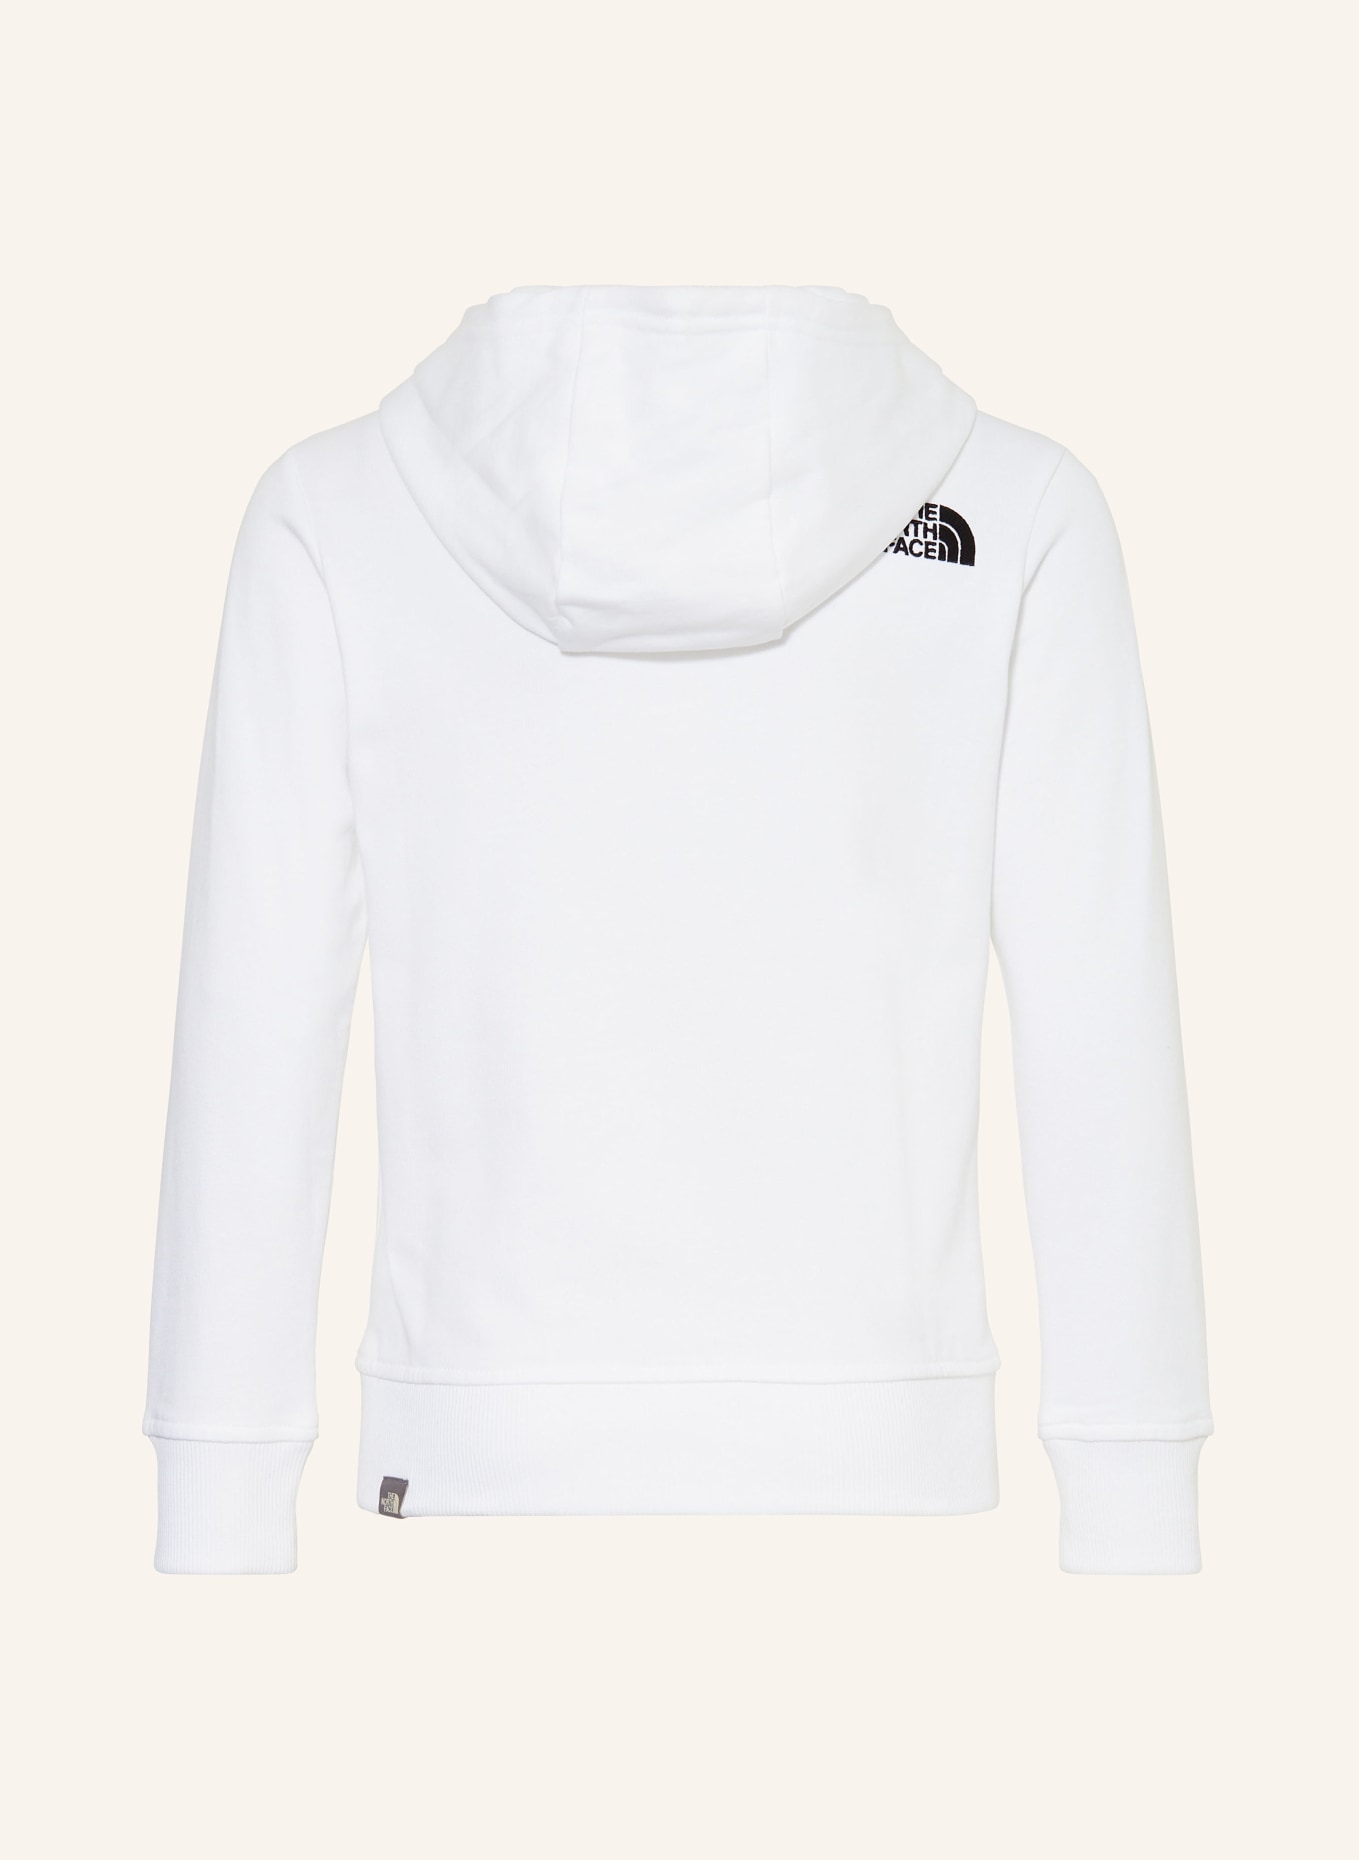 THE NORTH FACE Hoodie, Farbe: WEISS (Bild 2)